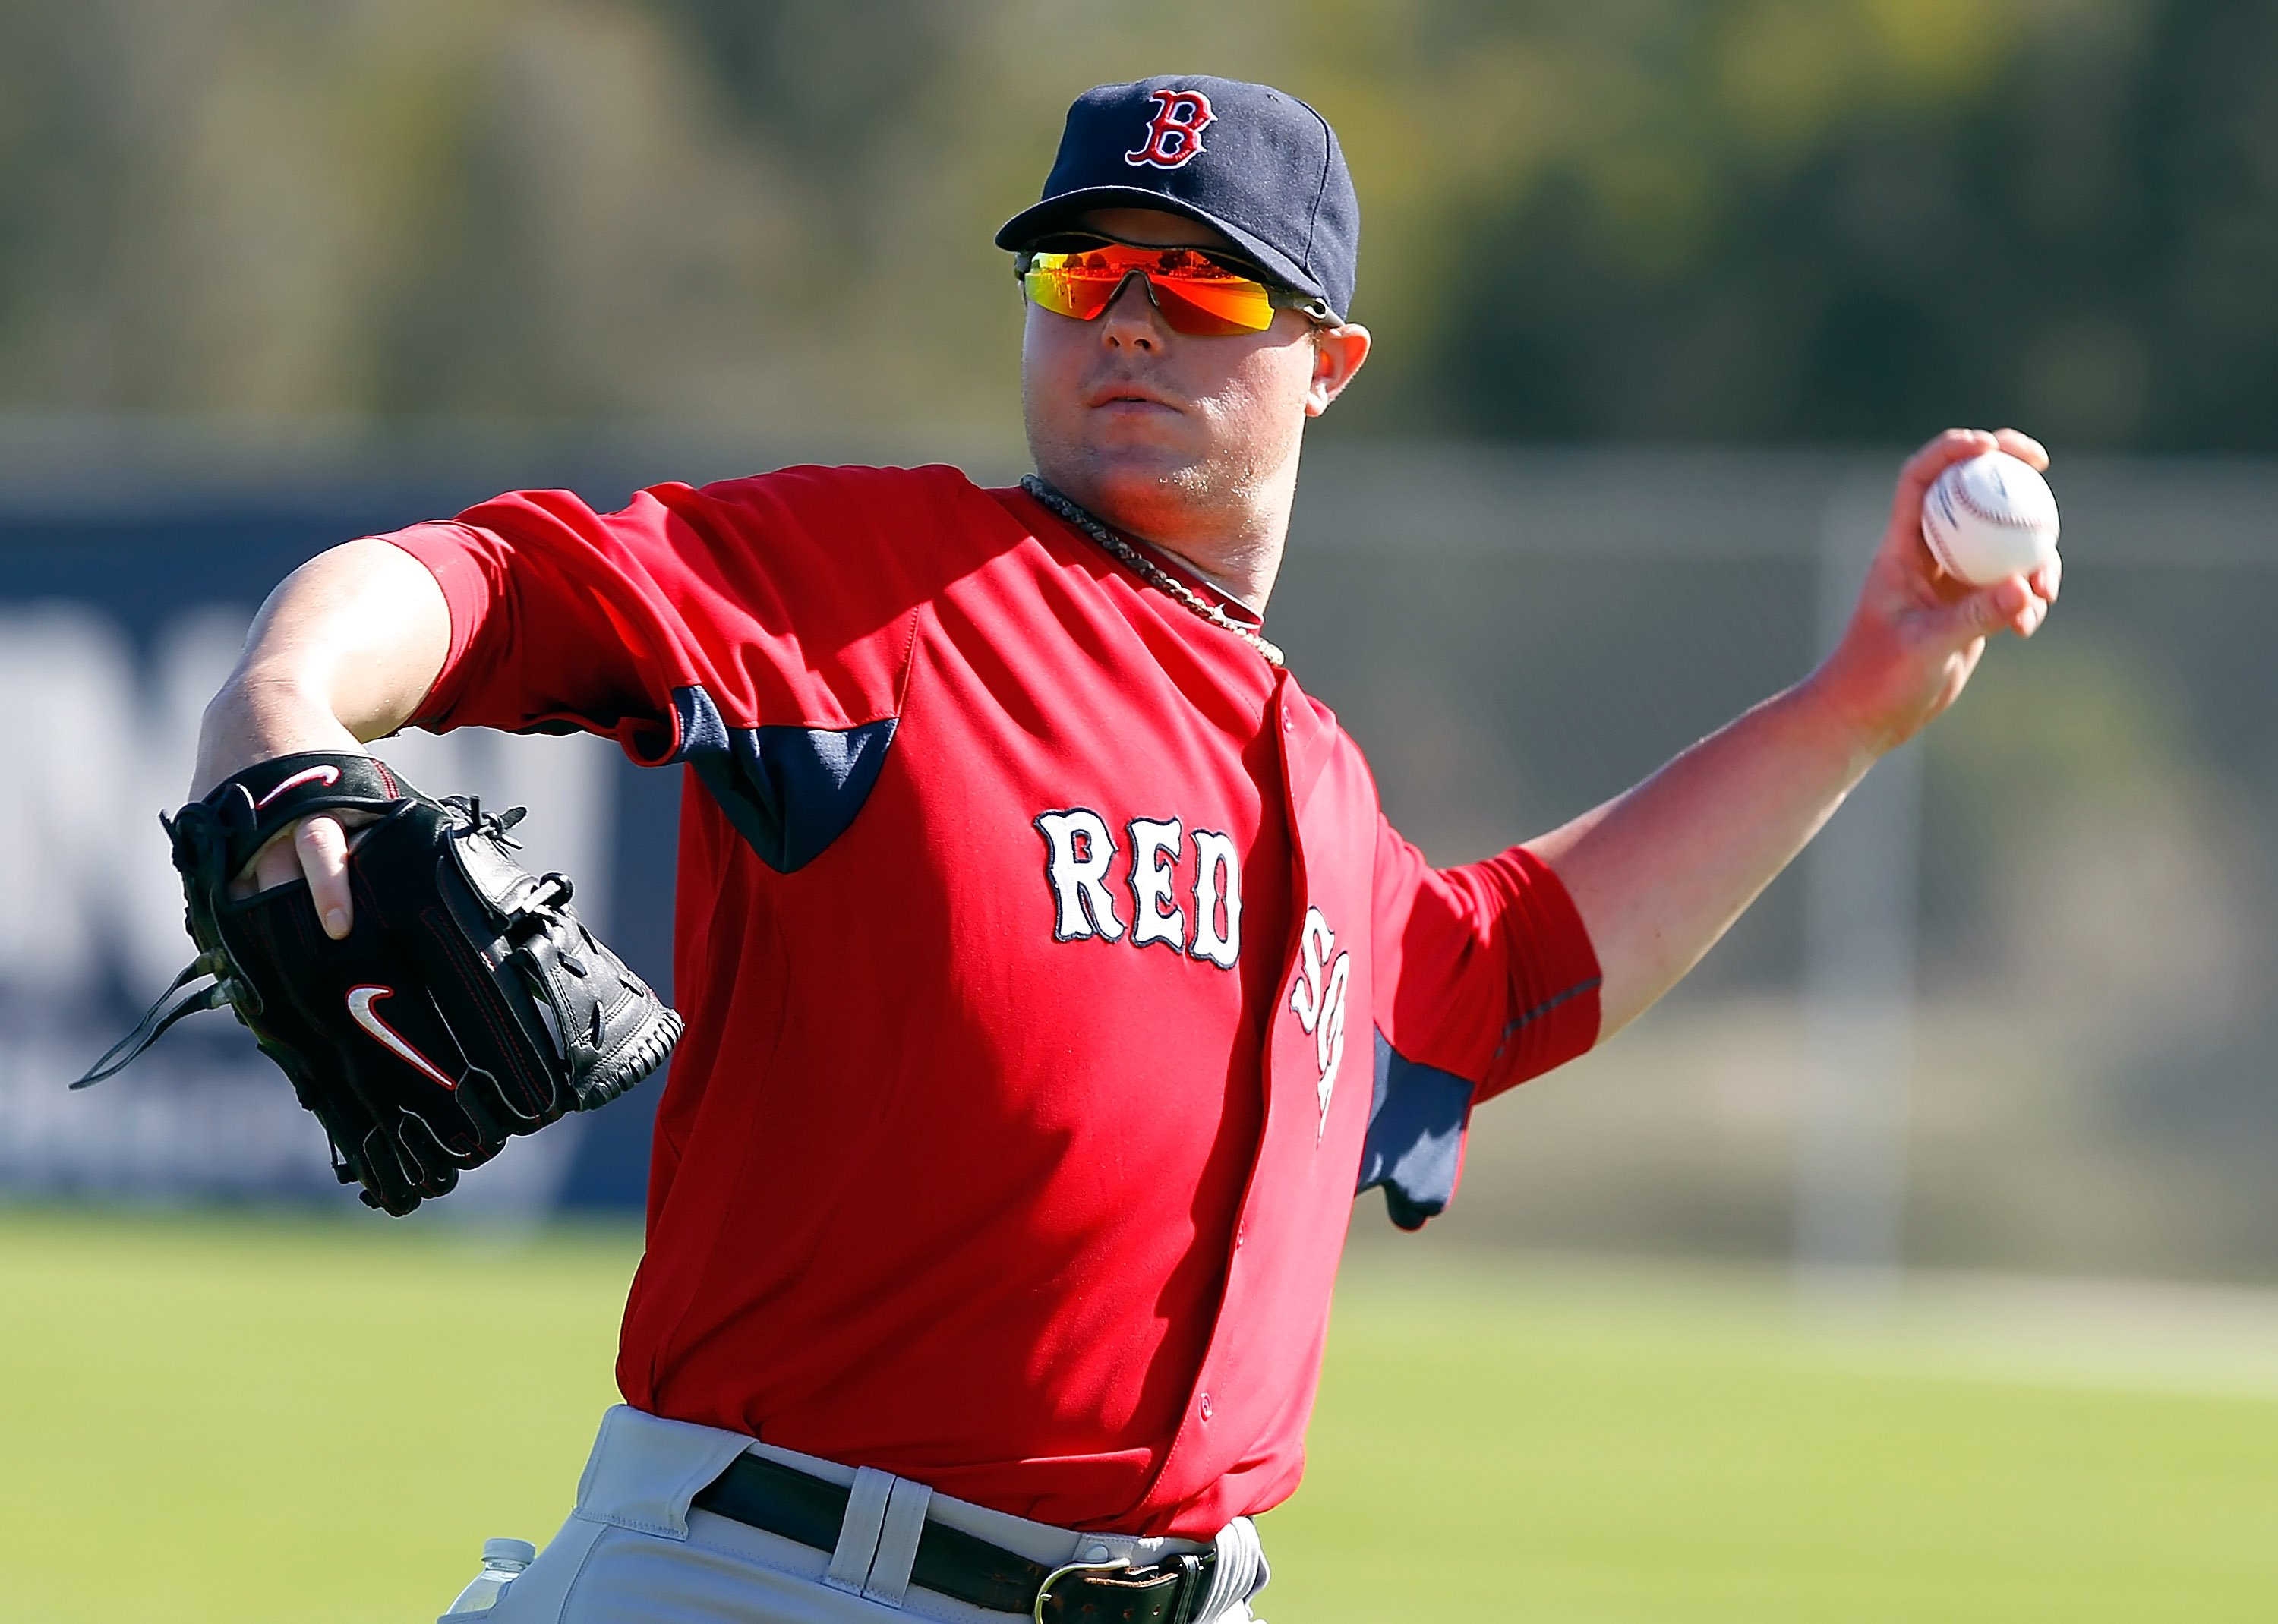 FORT MYERS, FL - FEBRUARY 19:  Pitcher Jon Lester #31 of the Boston Red Sox throws during a Spring Training Workout Session at the Red Sox Player Development Complex on February 19, 2011 in Fort Myers, Florida.  (Photo by J. Meric/Getty Images)